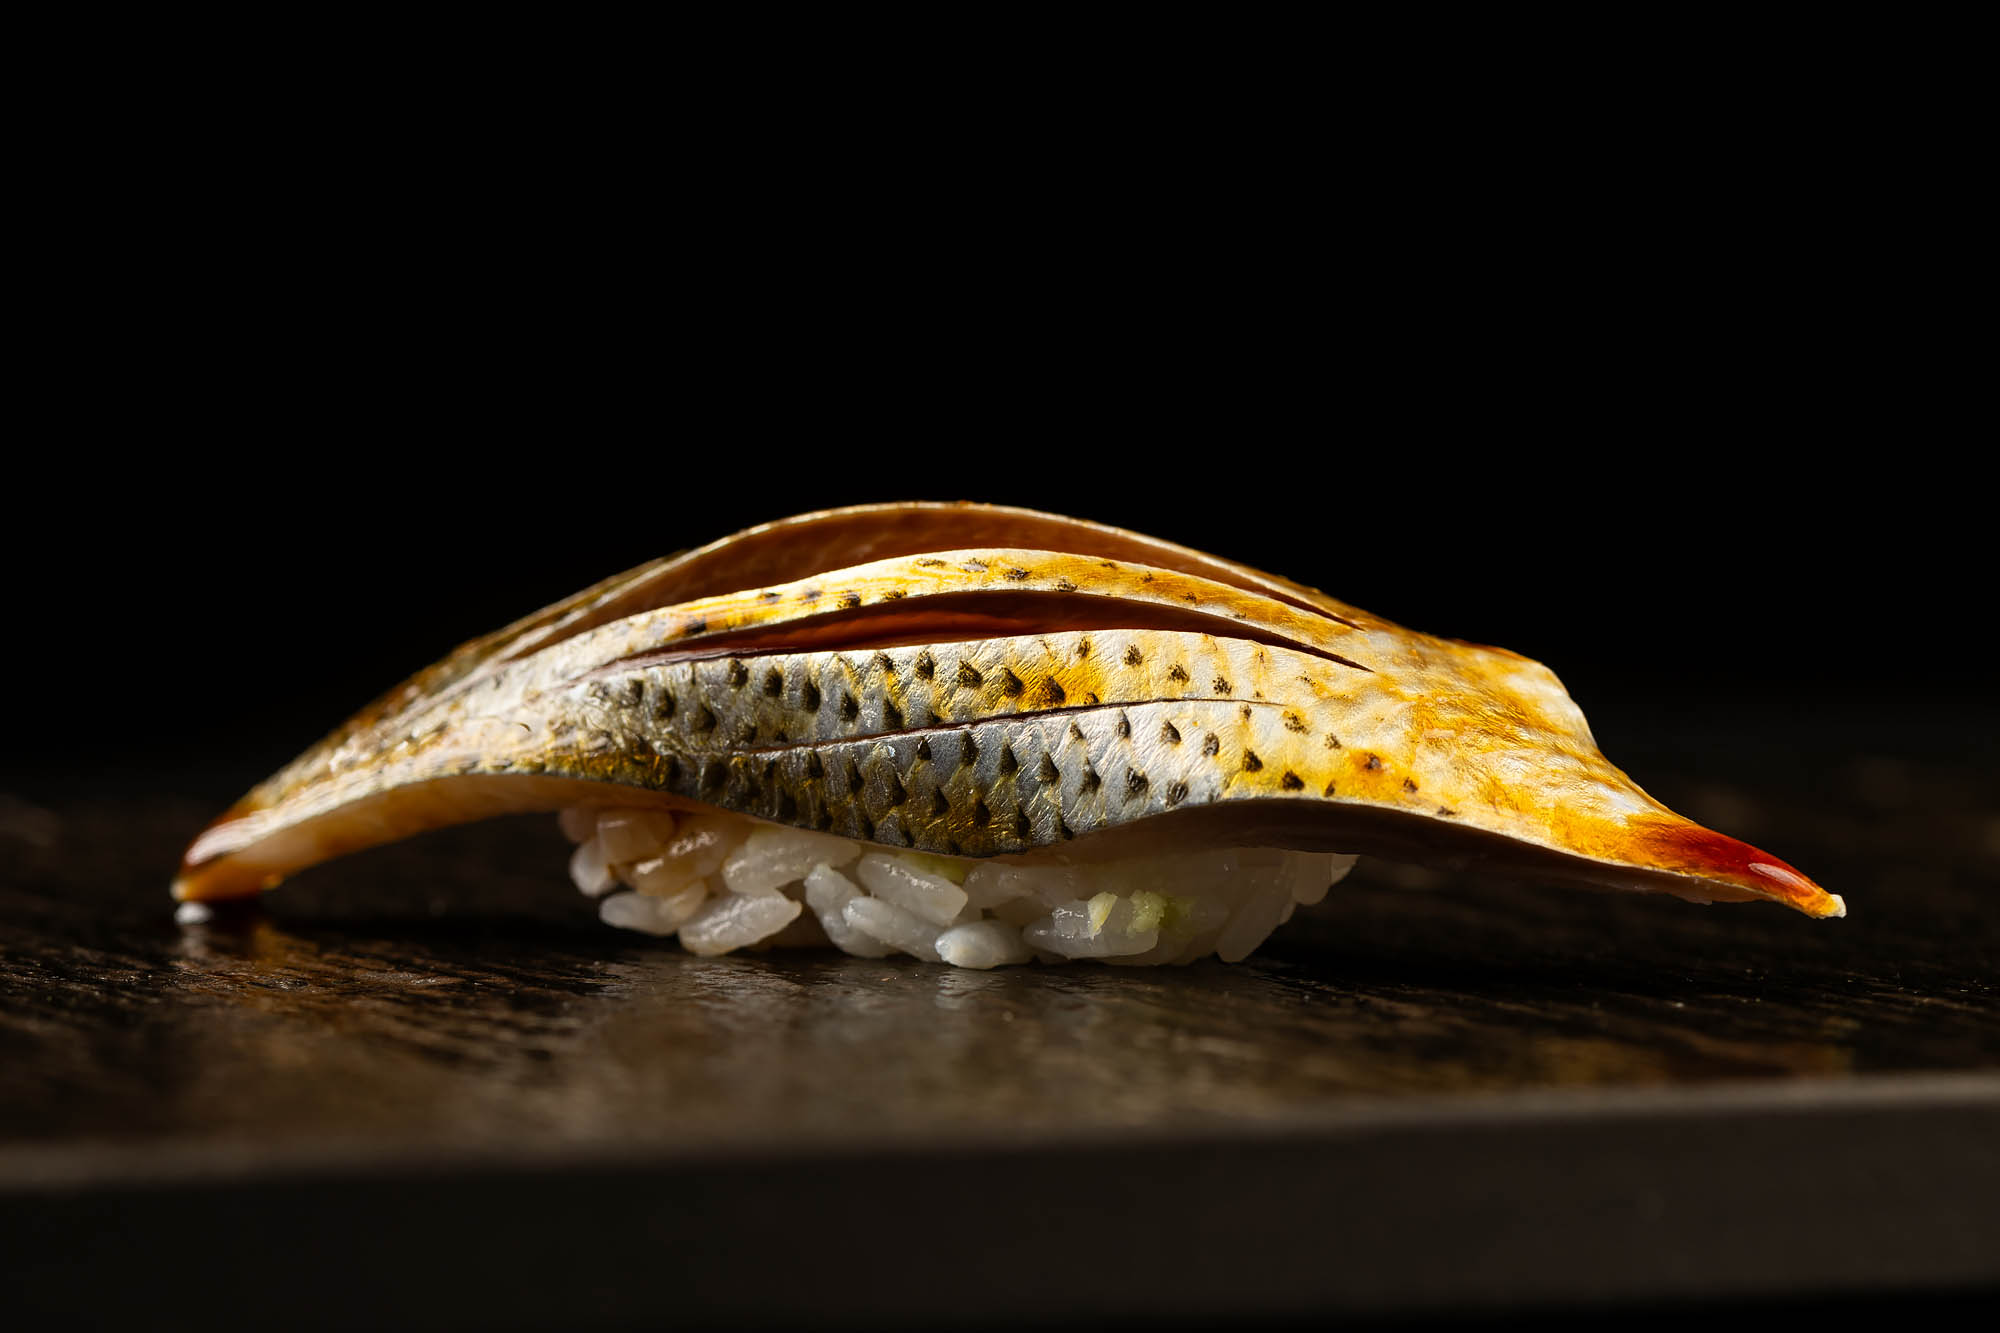 A piece of soy-sauce covered shad with slices inset over sushi rice.